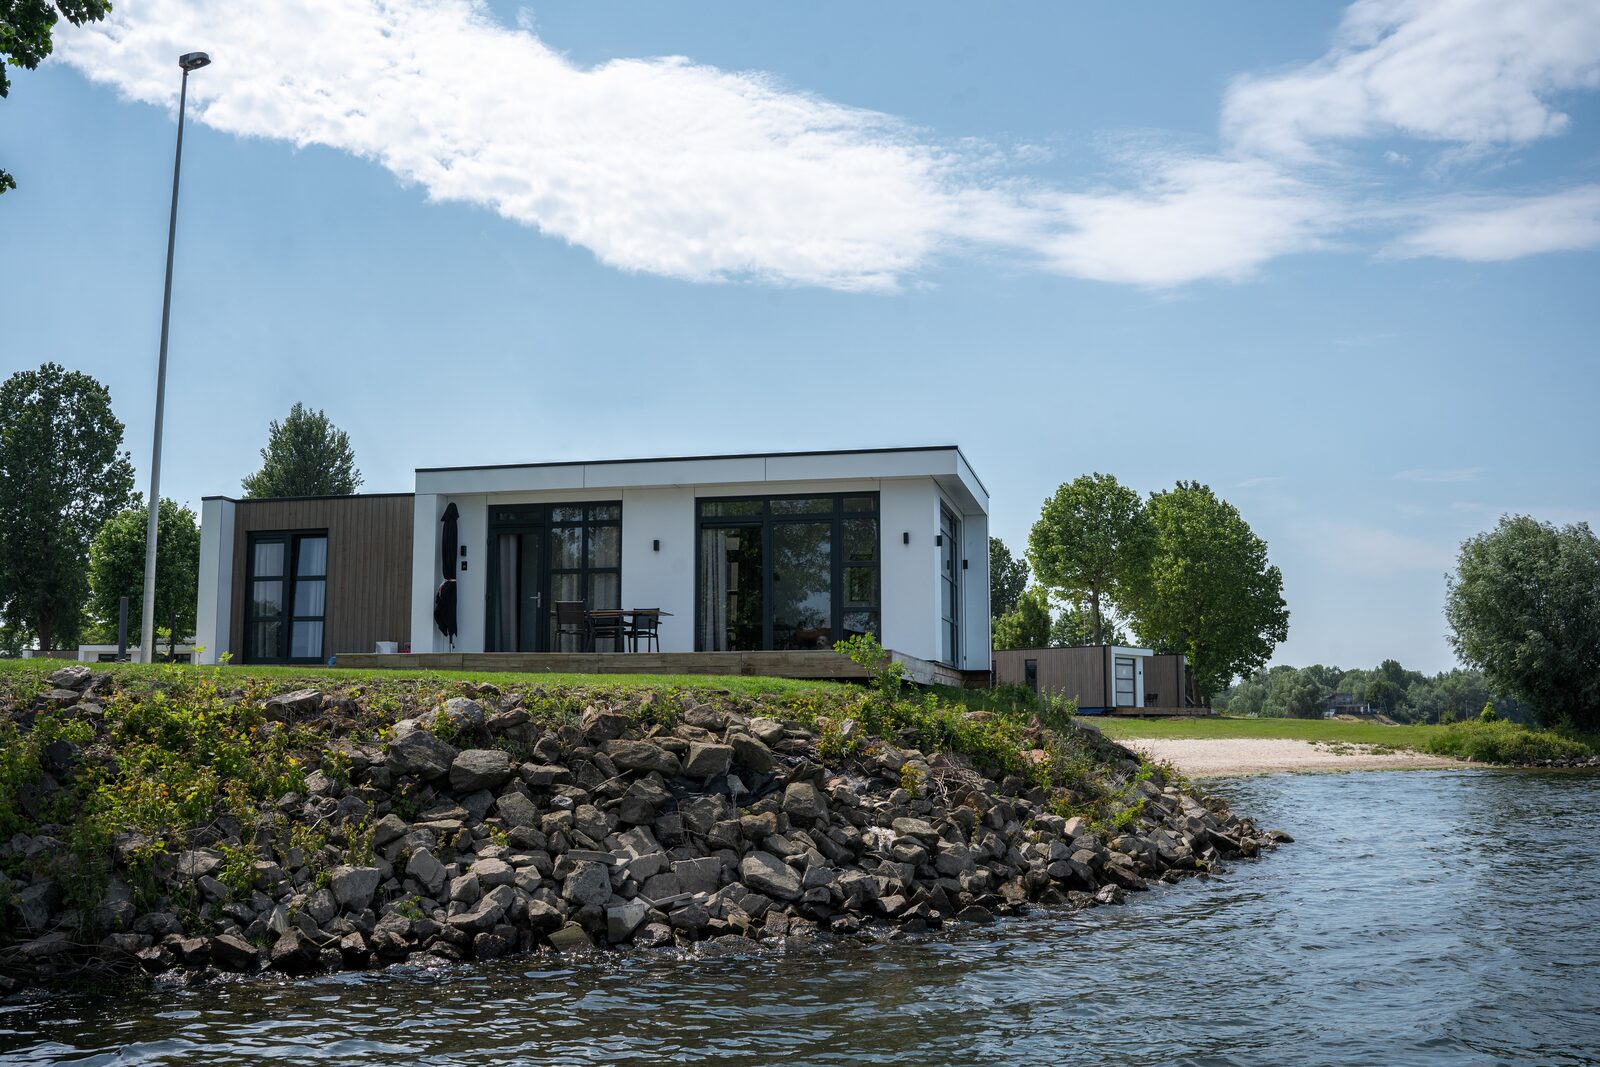 Take a look at our other park on the Nederrijn in Gelderland